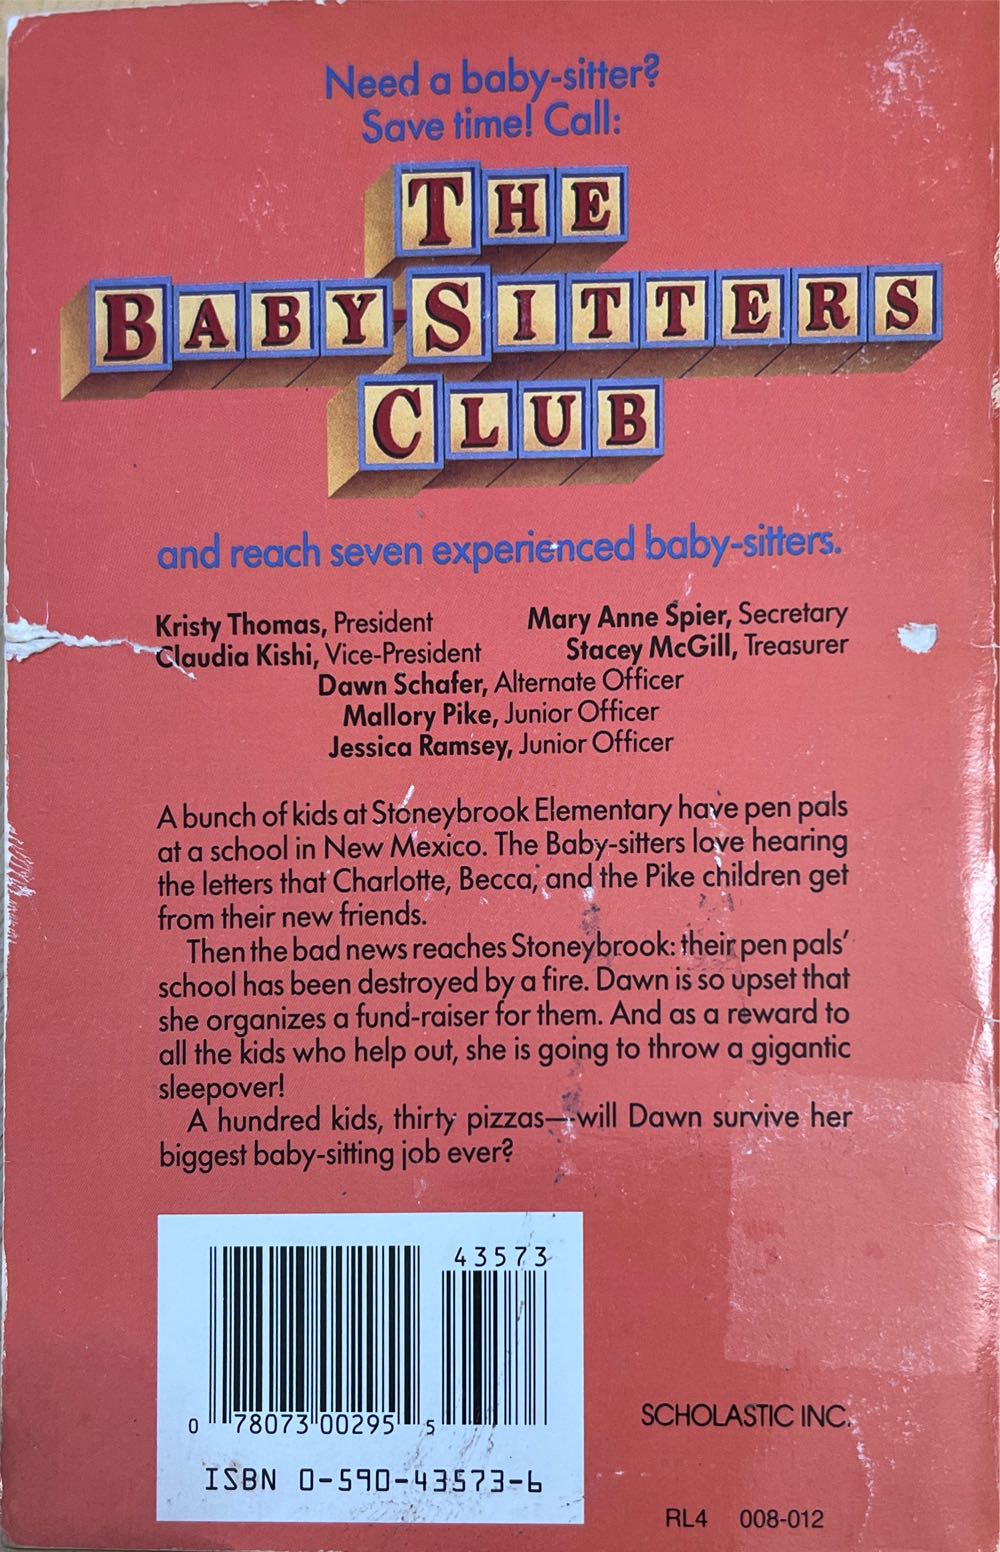 Baby-Sitters Club: Dawn And The Big Sleepover - Ann M. Martin (Scholastic - Paperback) book collectible [Barcode 9780590435734] - Main Image 2